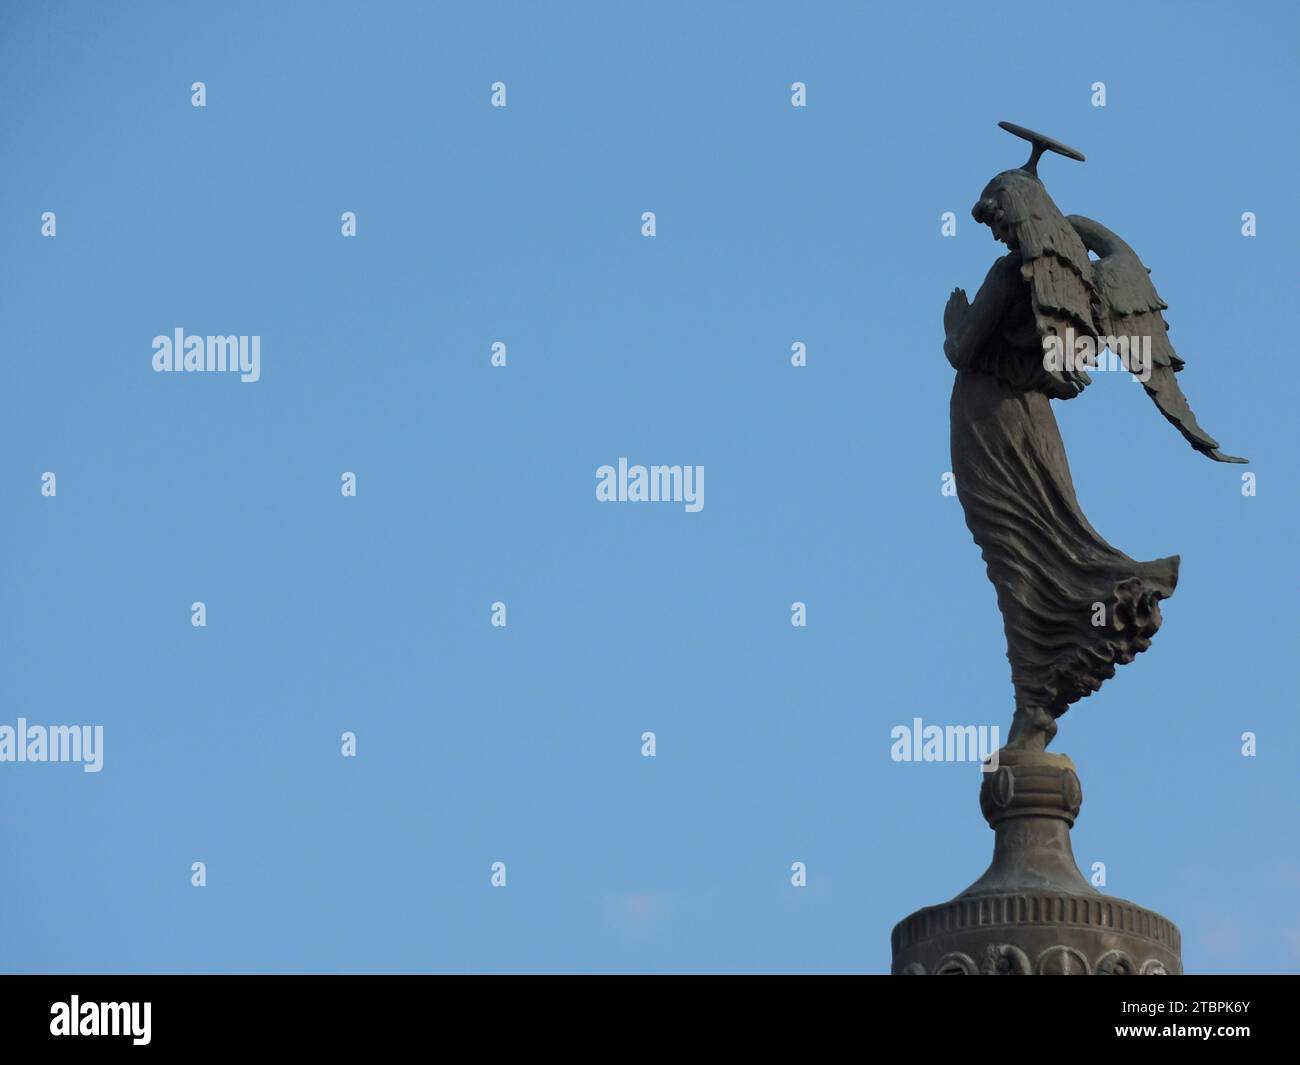 A bronze statue of a figure with a hammer in hand, standing atop a tall building Stock Photo